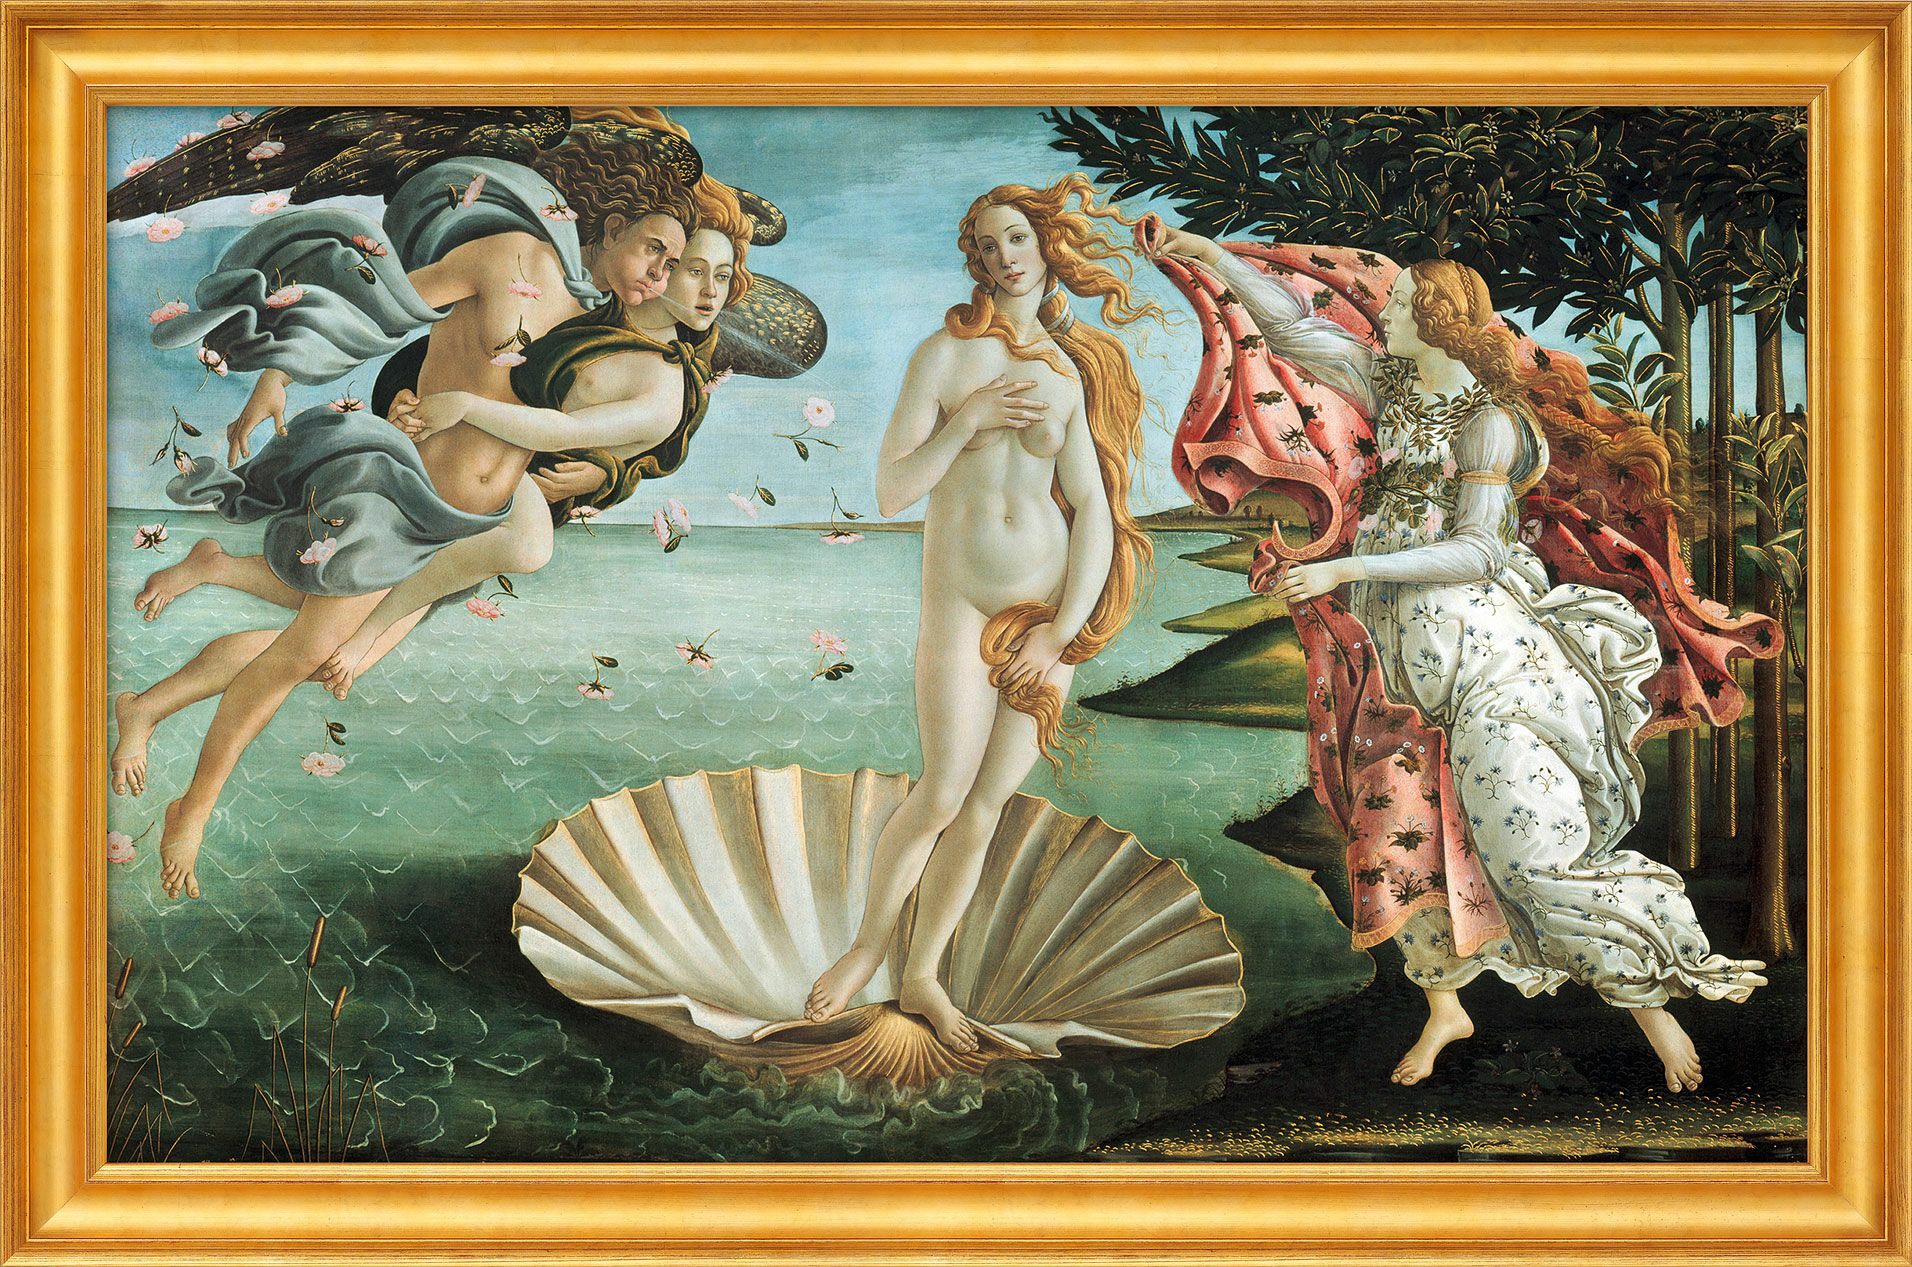 Picture "The Birth of Venus" (1484/86), framed by Sandro Botticelli